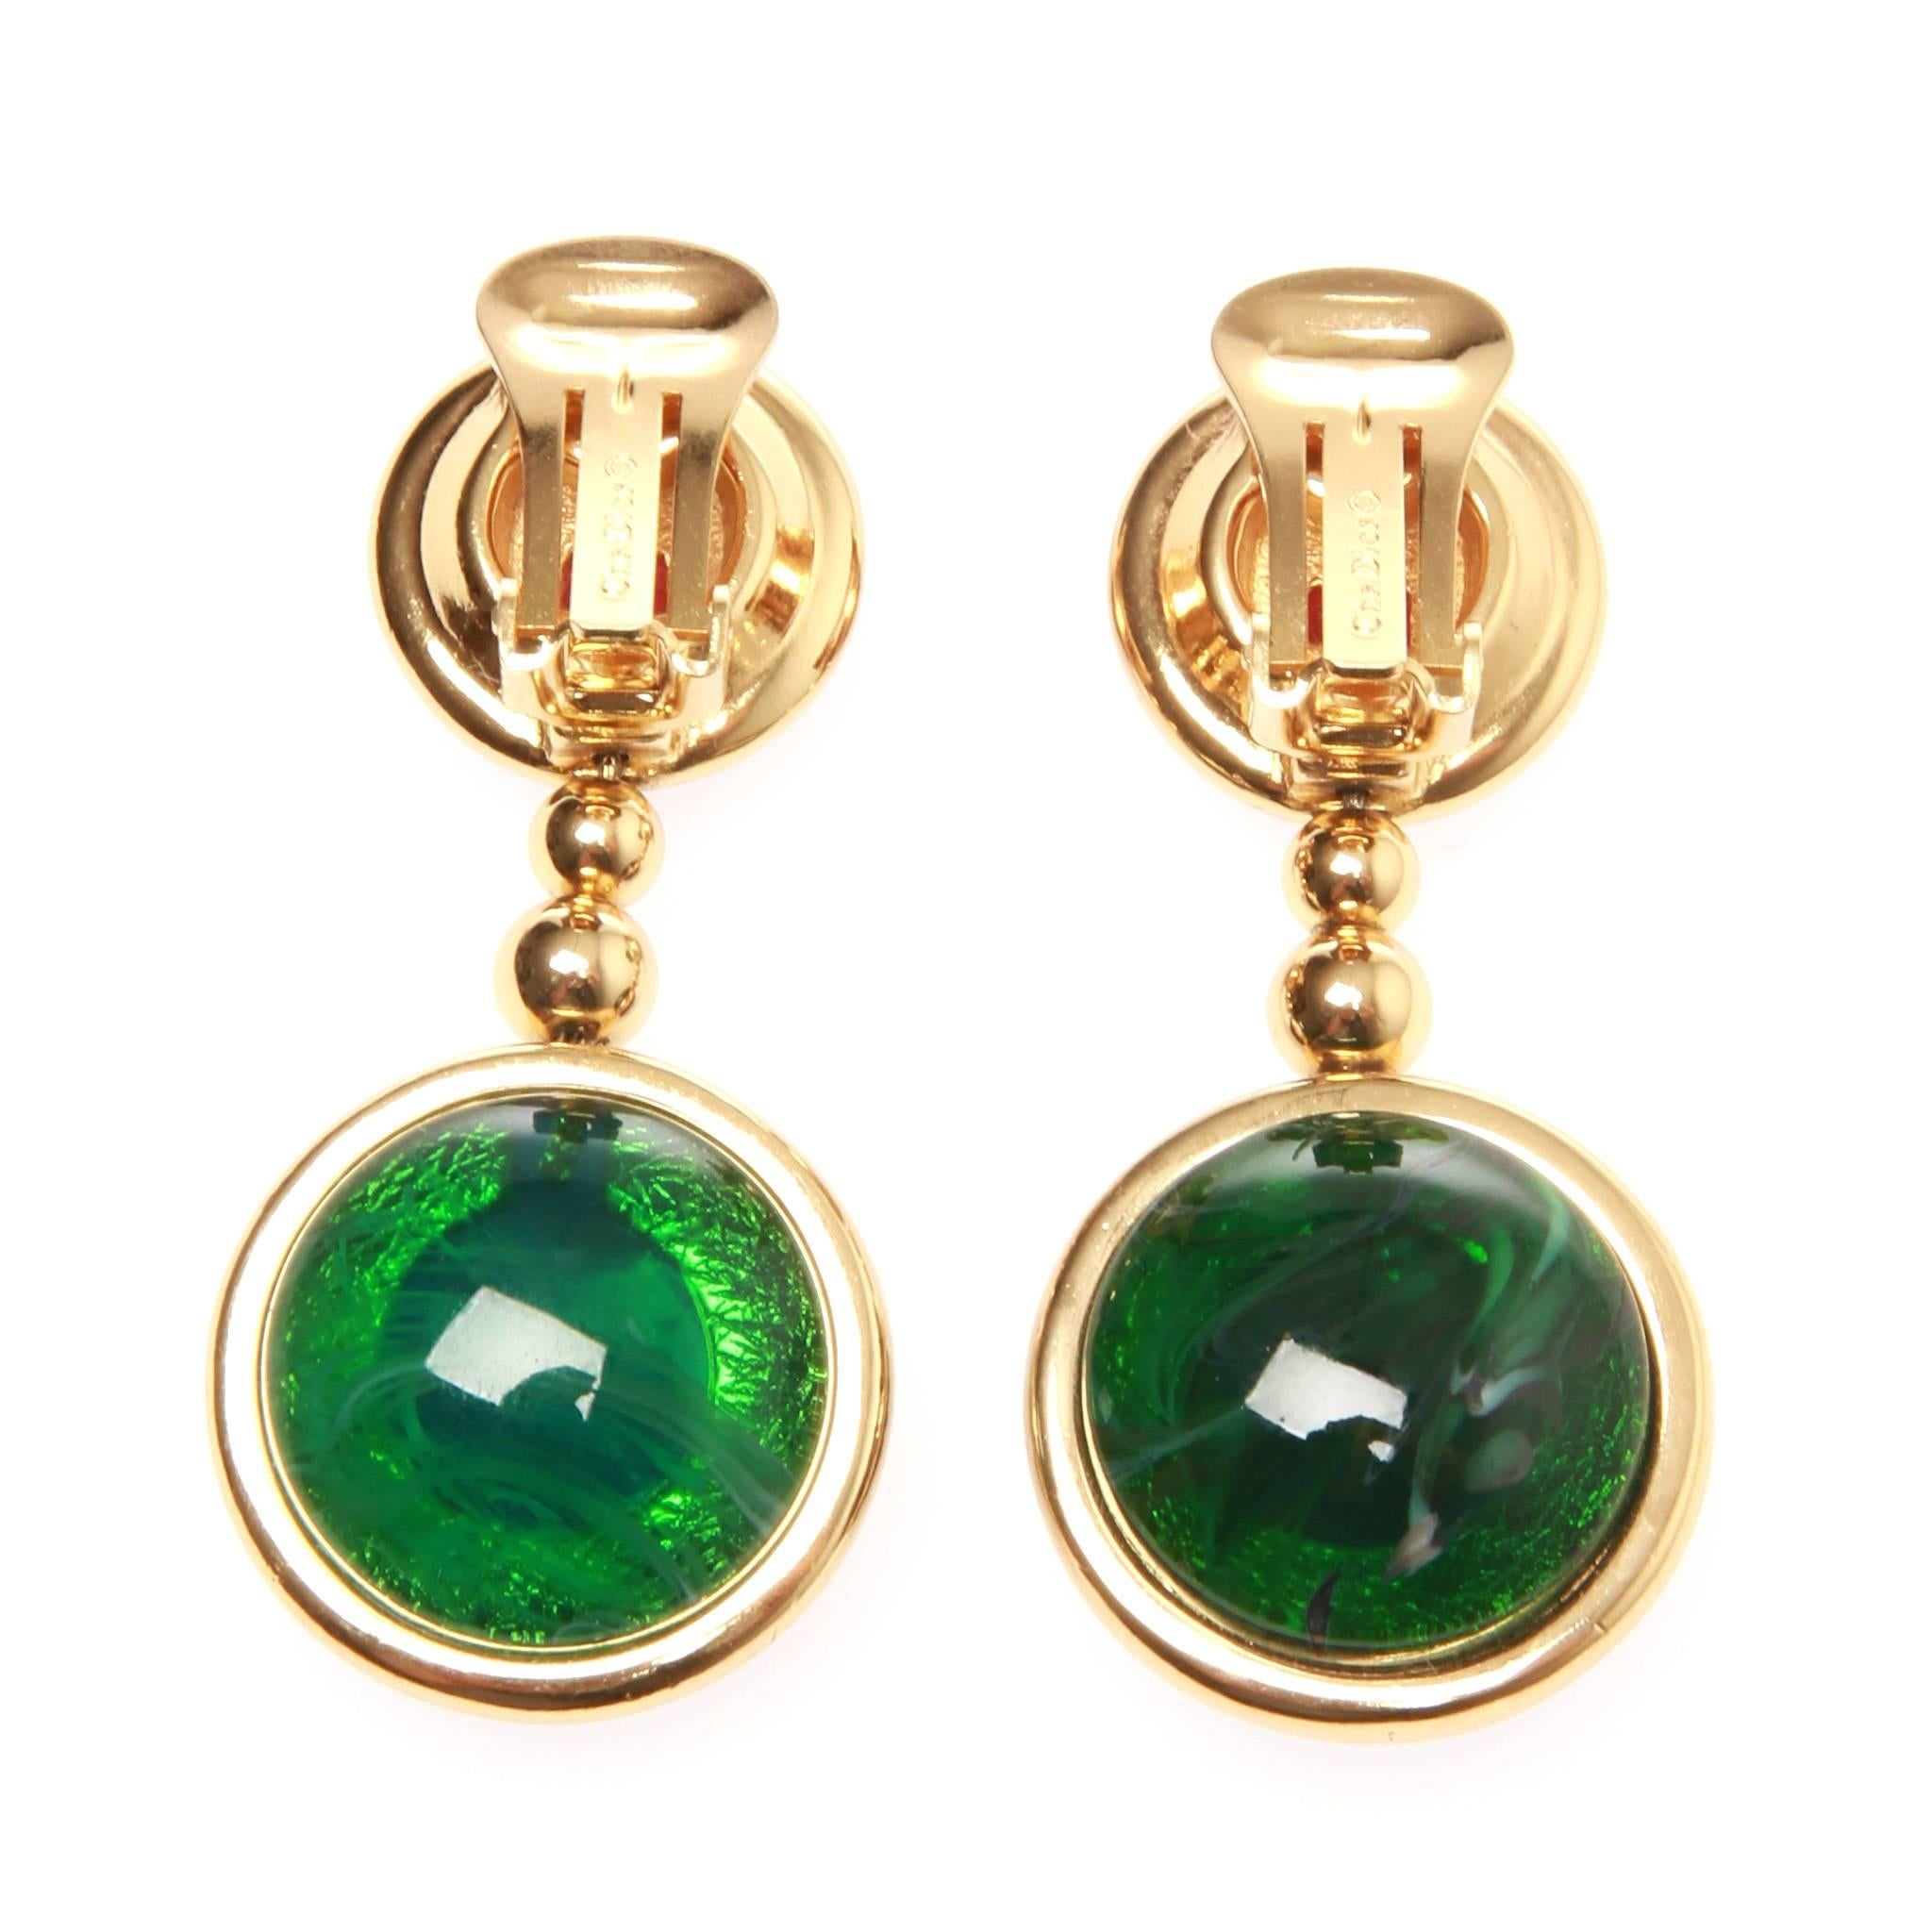 	
Christian Dior drop earrings. 

An eye catching vintage pair of Christian Dior colour earrings you won't want to miss.

Gold tone setting with red, blue and green ton coloured glass stones.

Features: Clip on